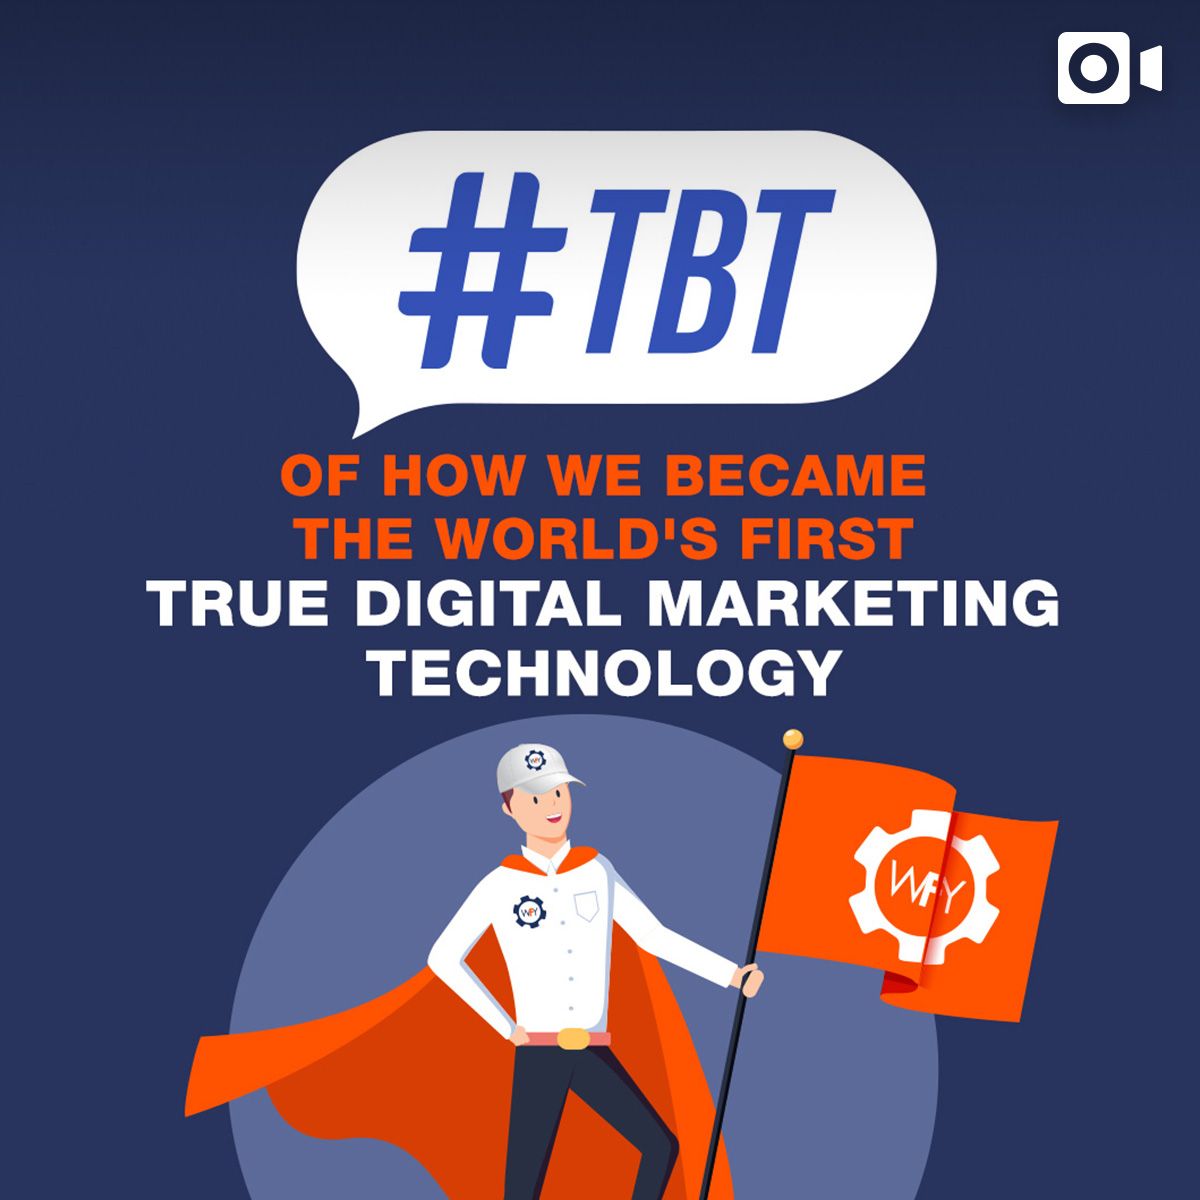 #TBT of how we became the world's first true digital marketing technology